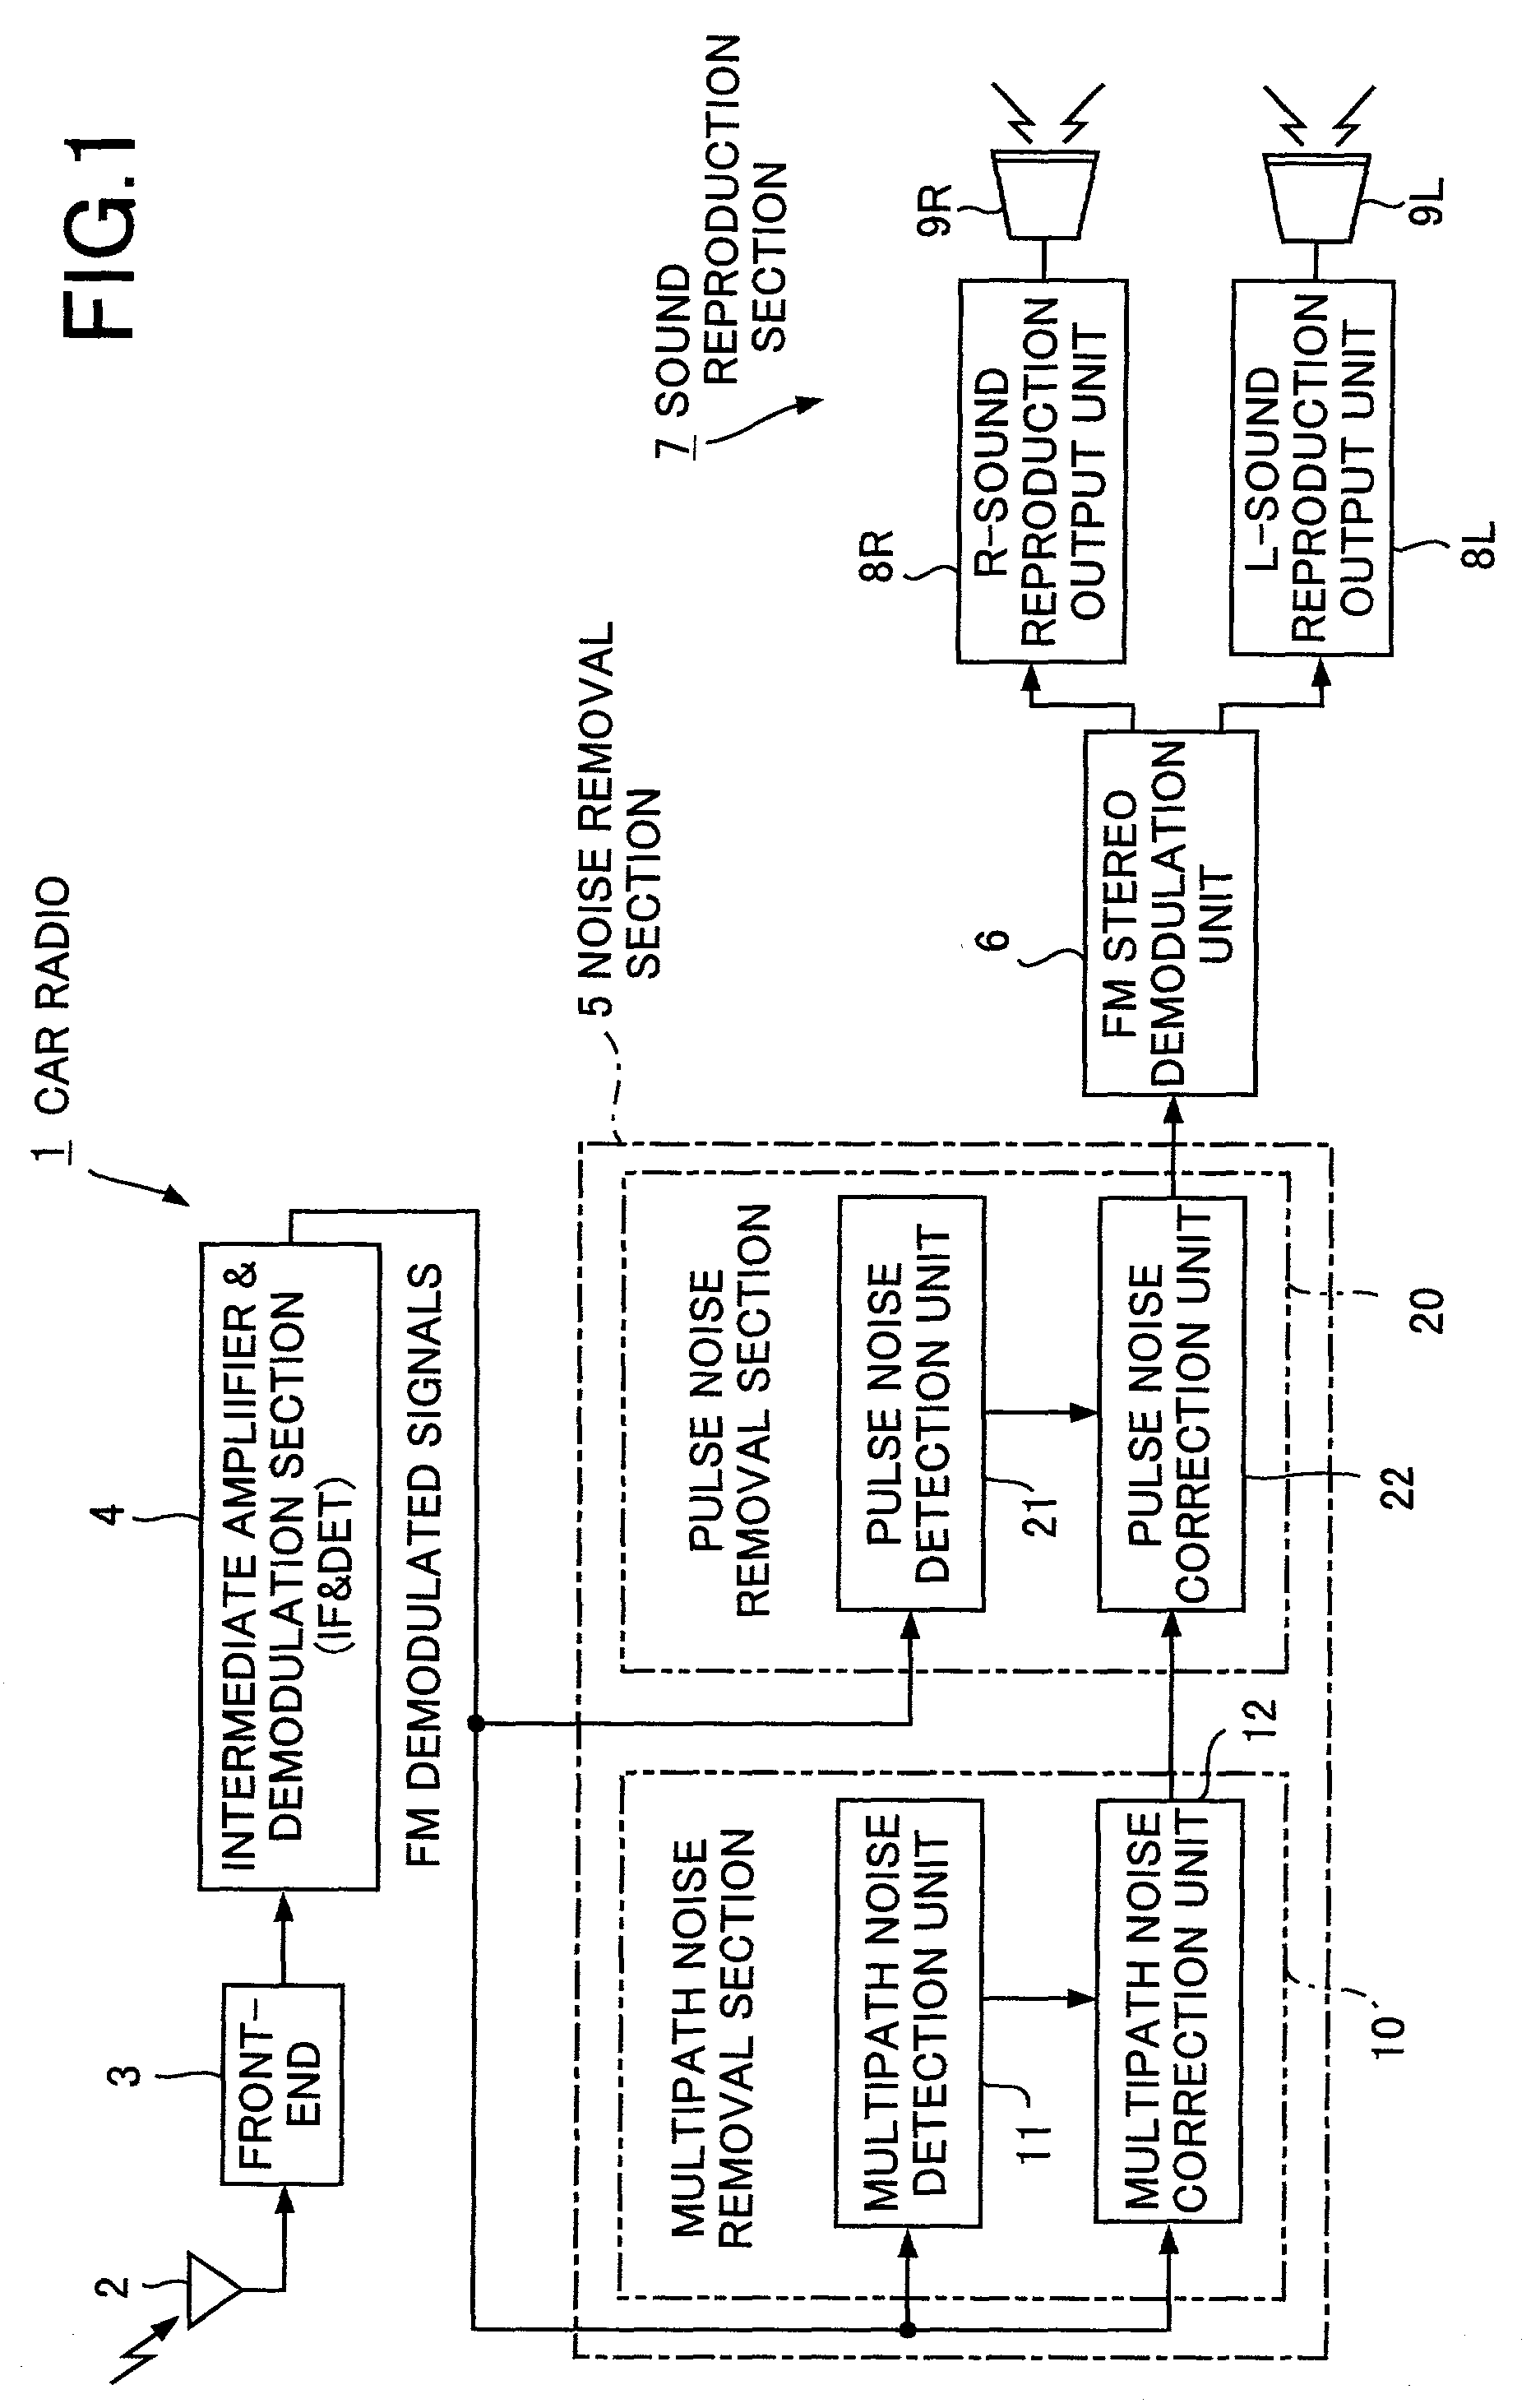 Noise removal apparatus and an FM receiver